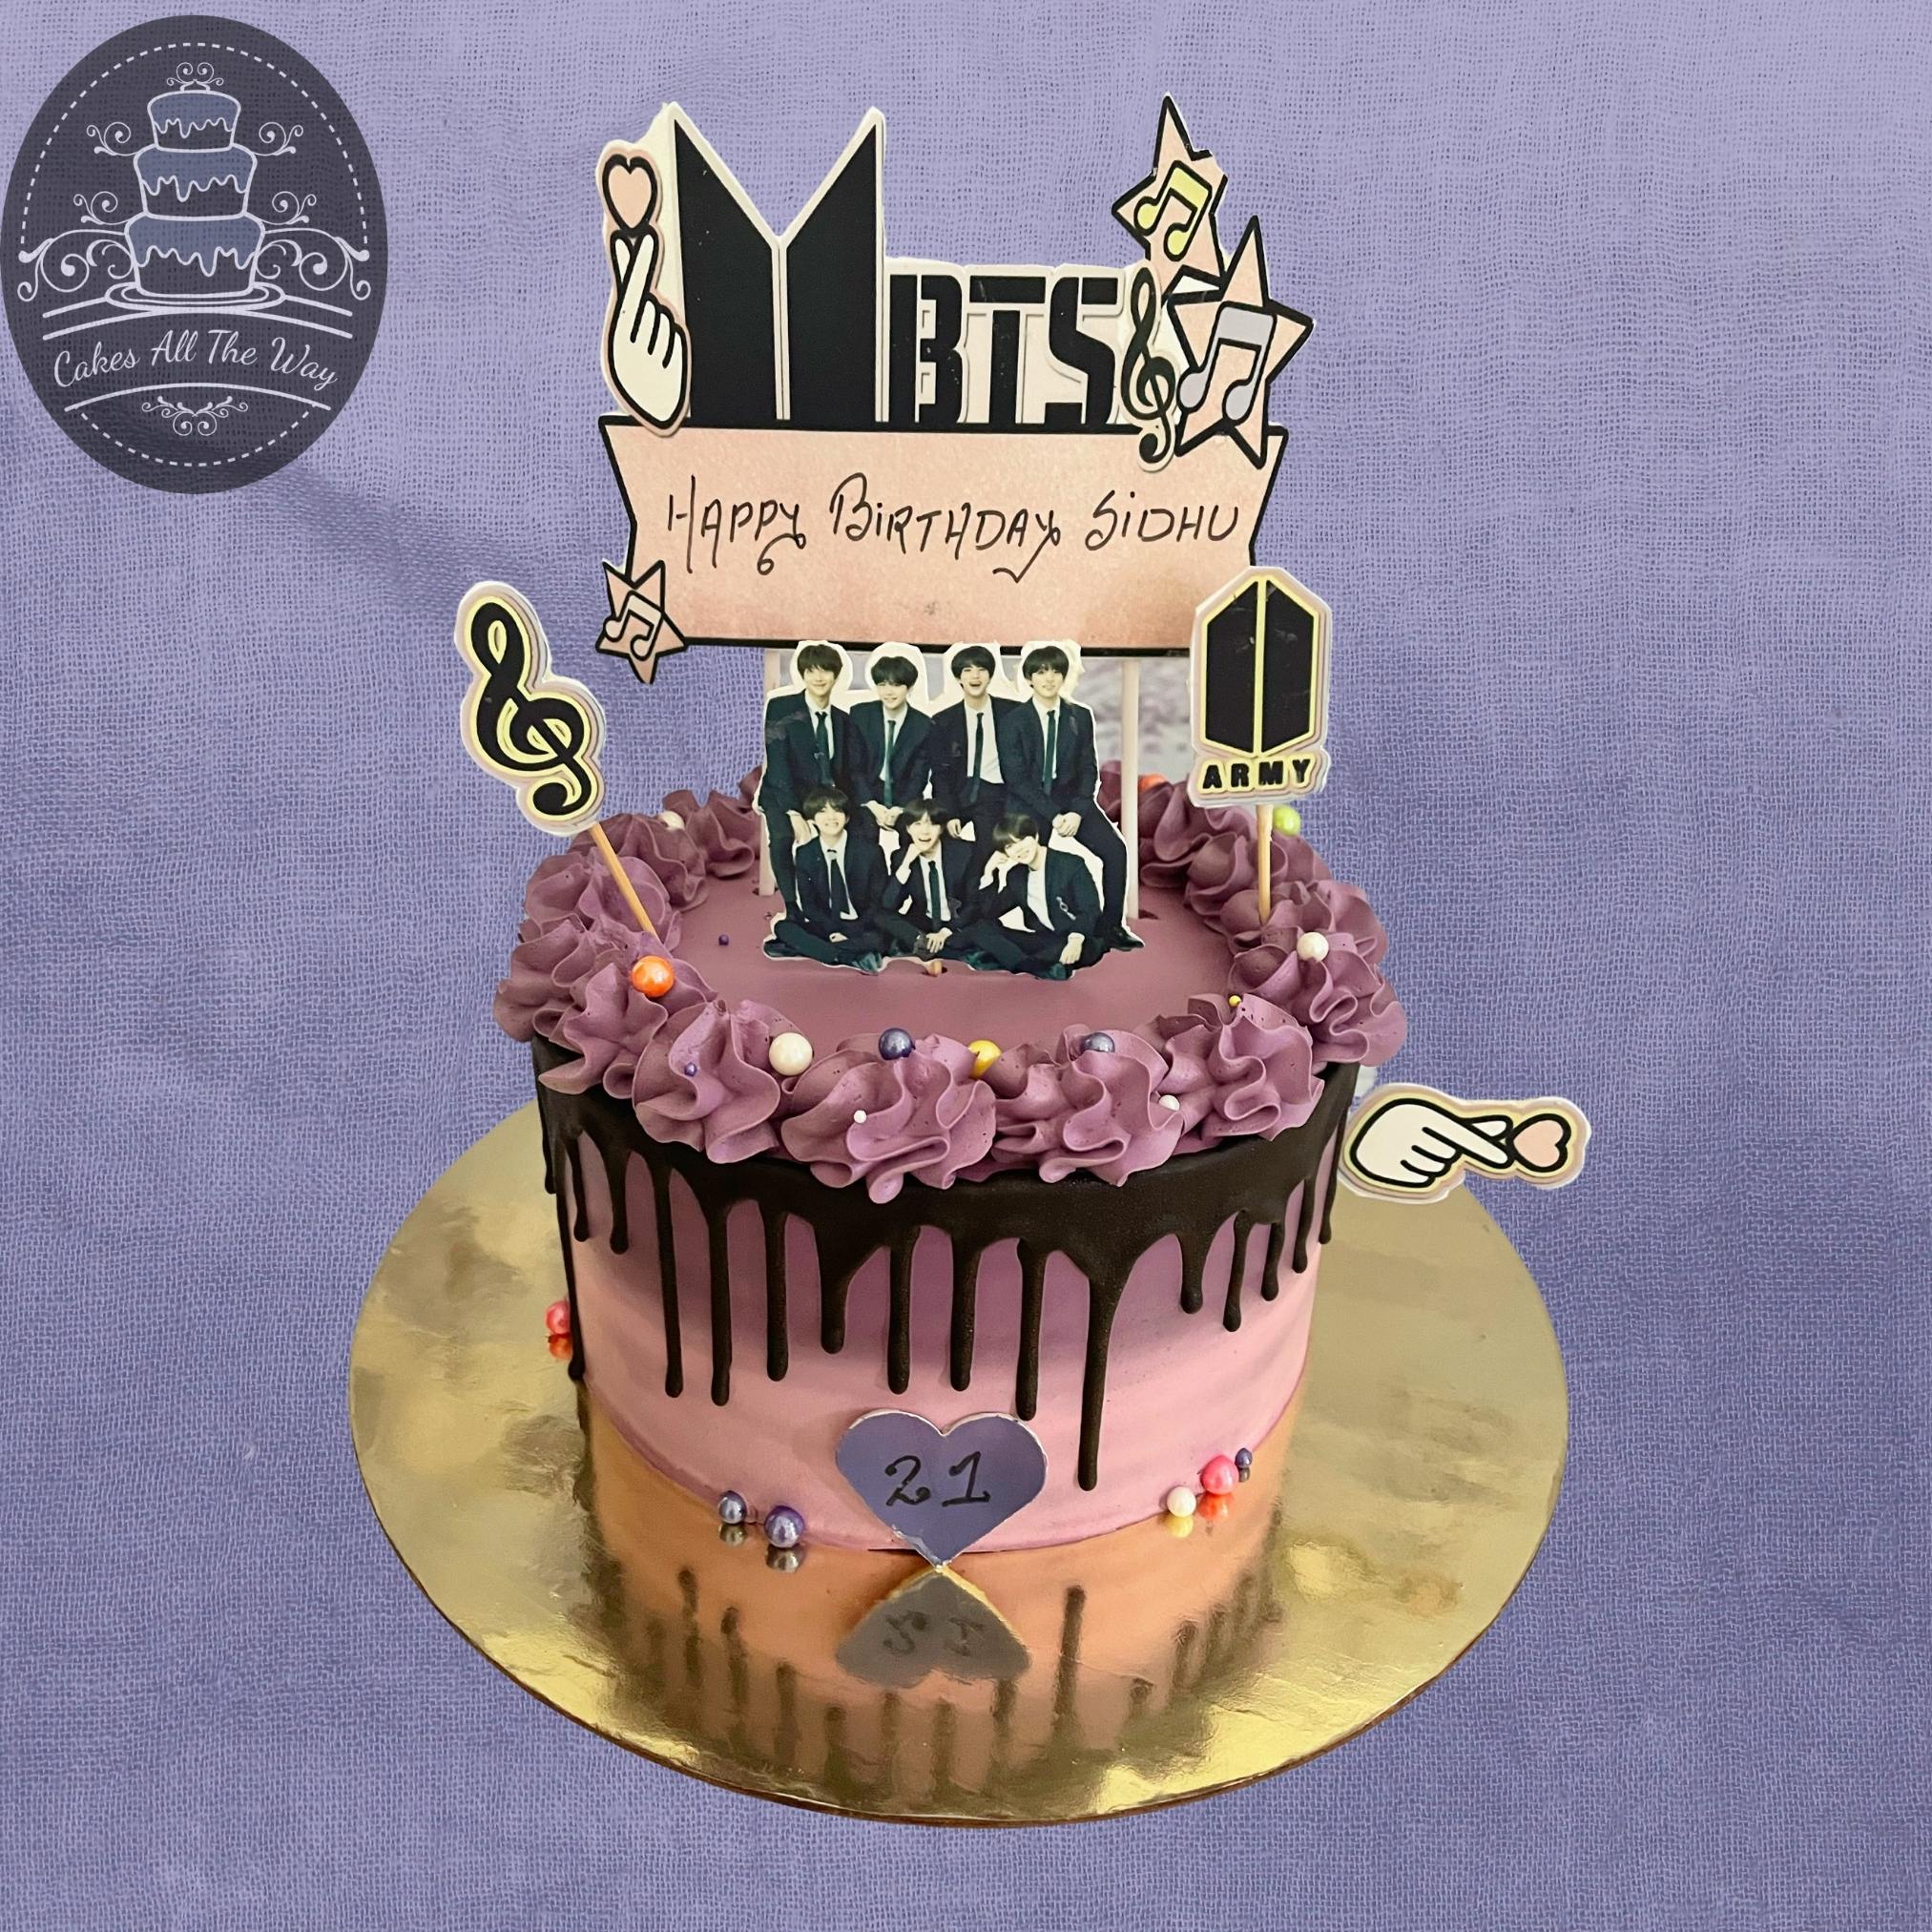 BTS Cake - 1119 – Cakes and Memories Bakeshop